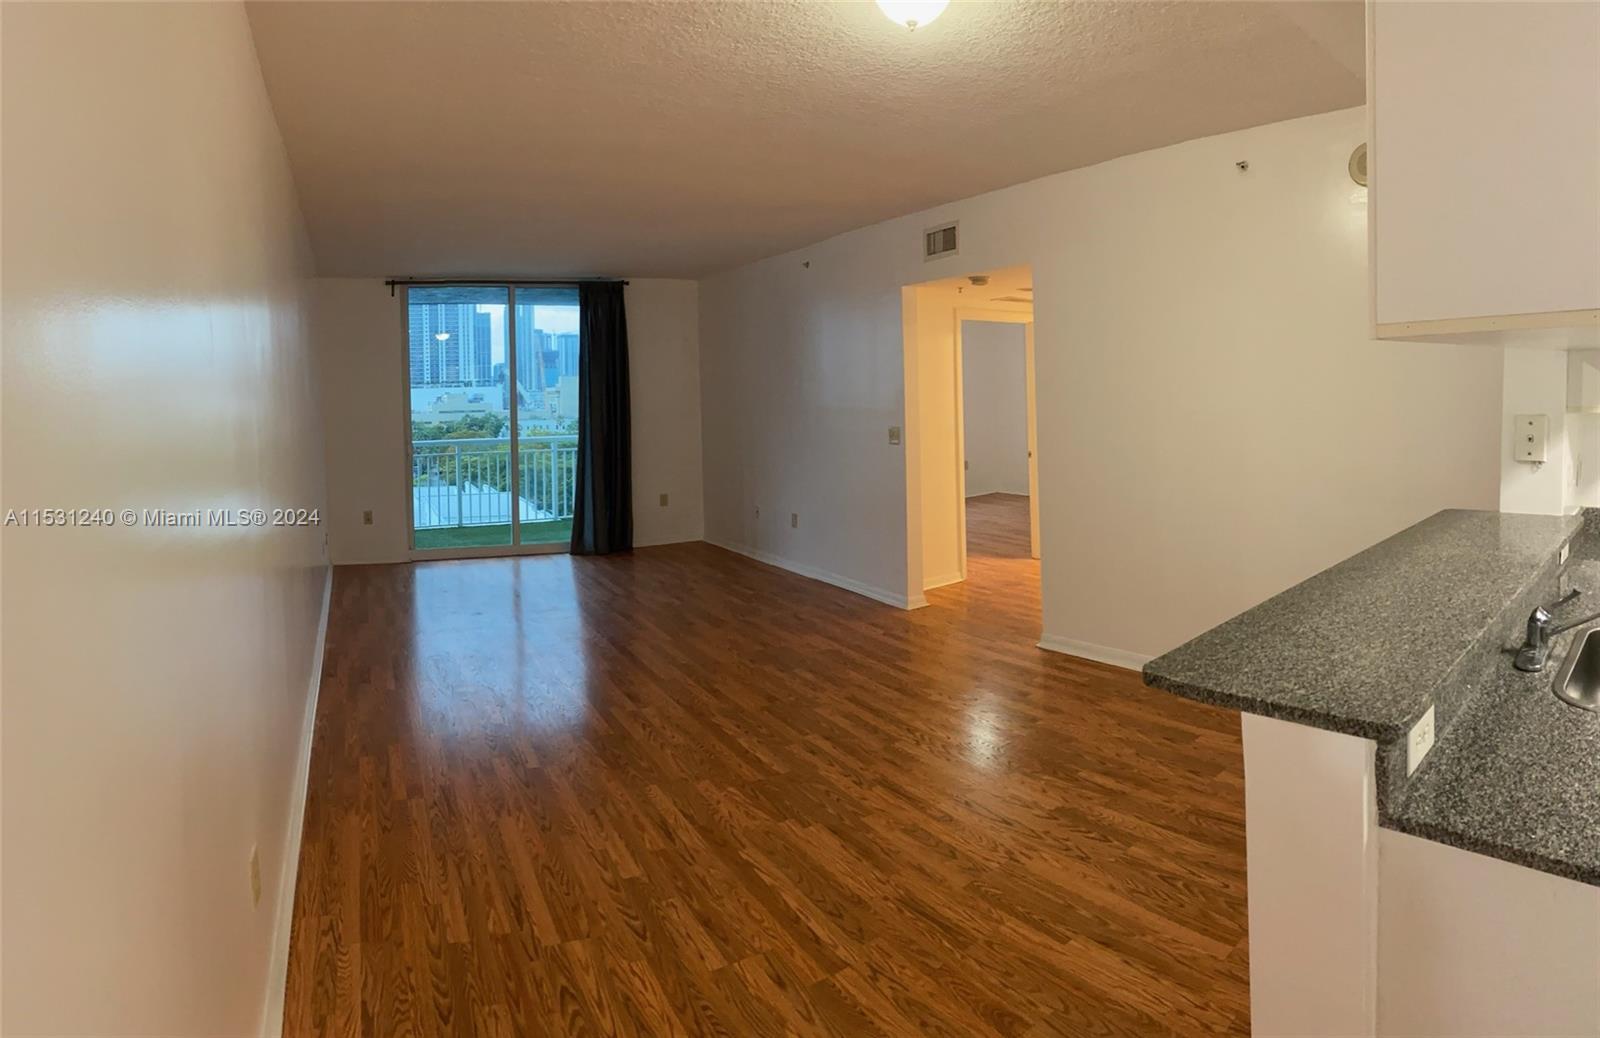 Spacious 2/2 Corner unit. Great Location right on Biscayne Blvd. Offers granite countertops, ample v